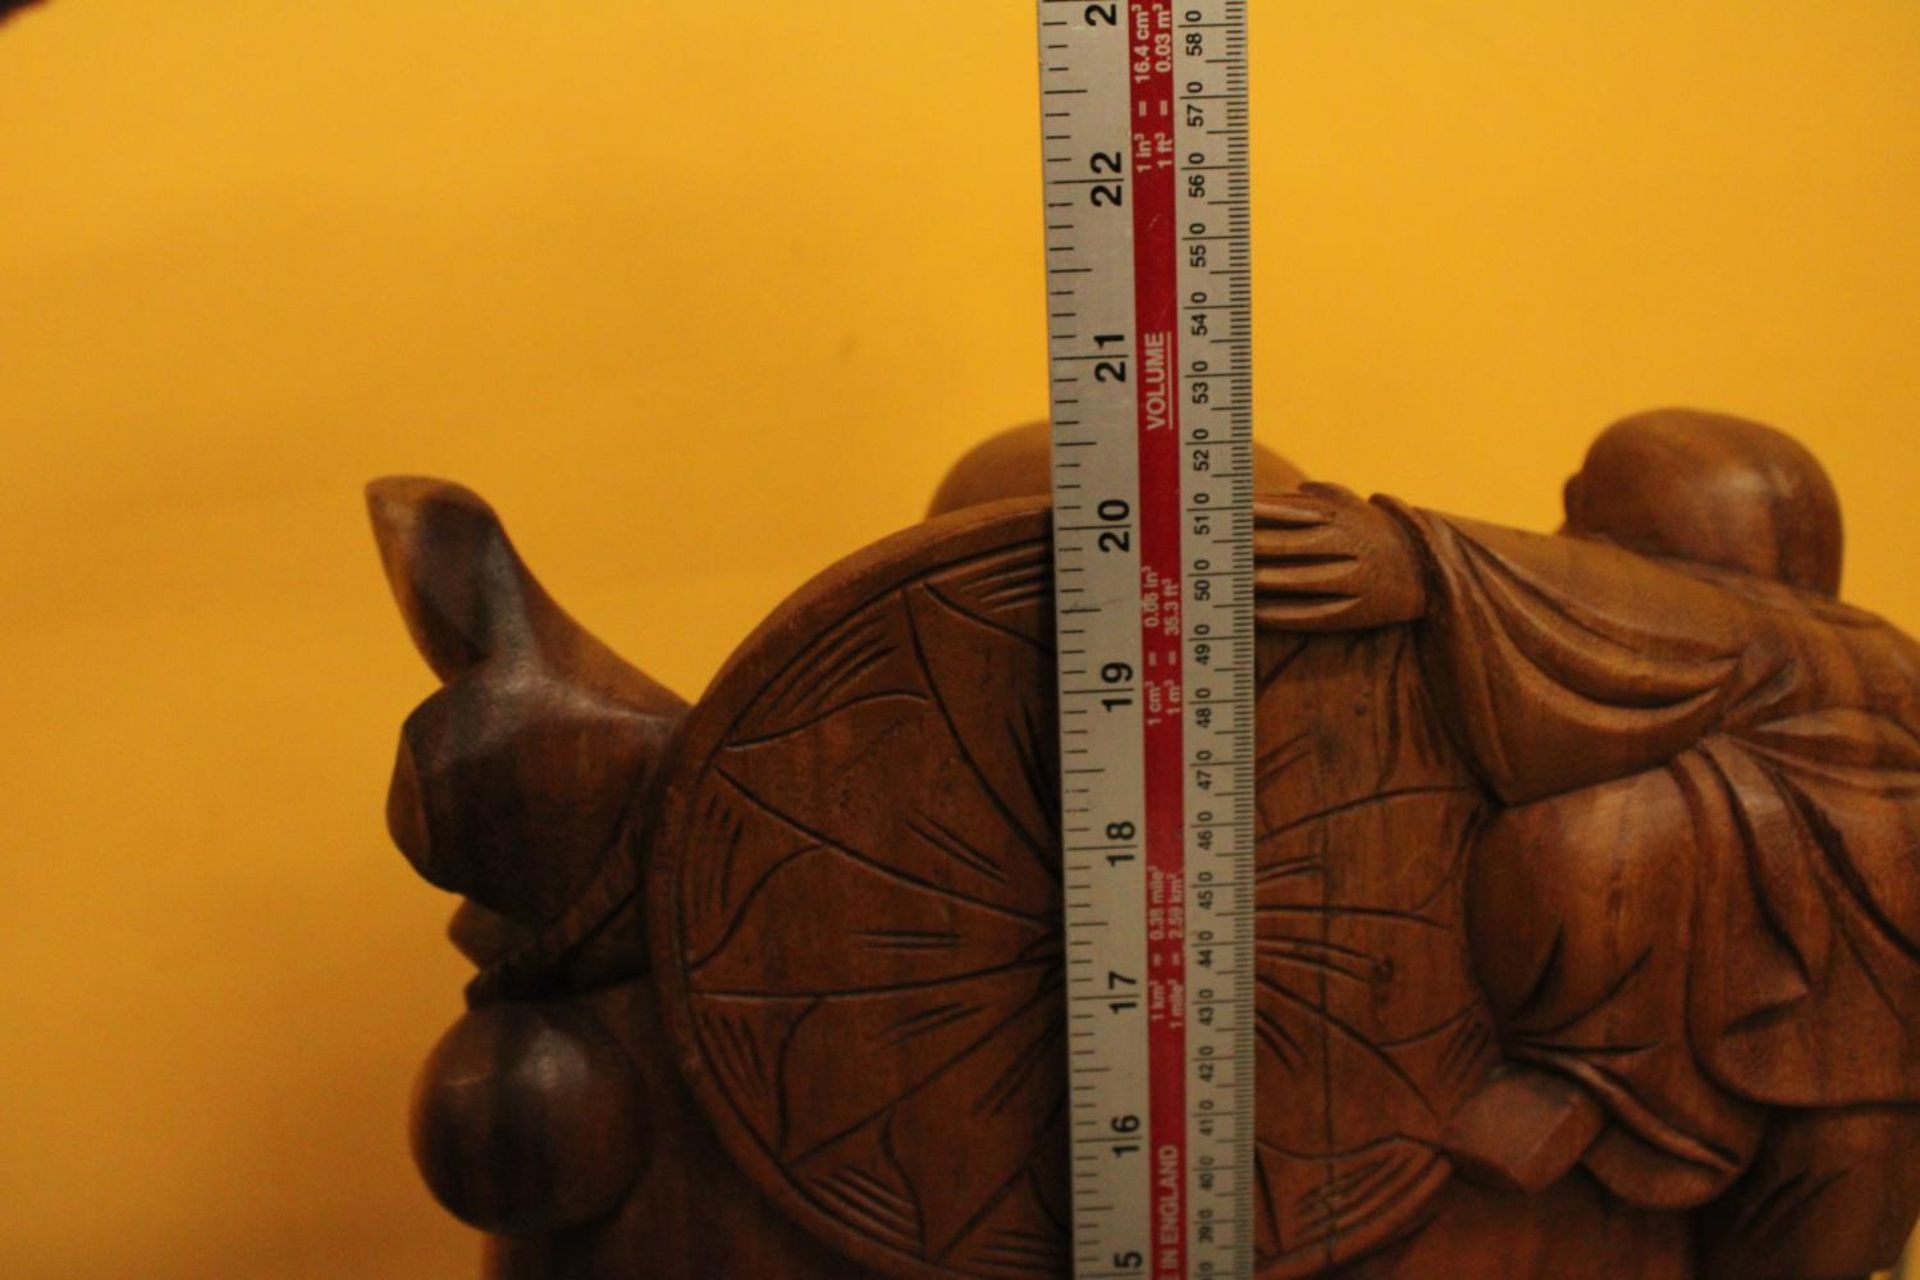 A CARVED WOODEN LAUGHING BUDDAH FIGURE 20" TALL - Image 6 of 6